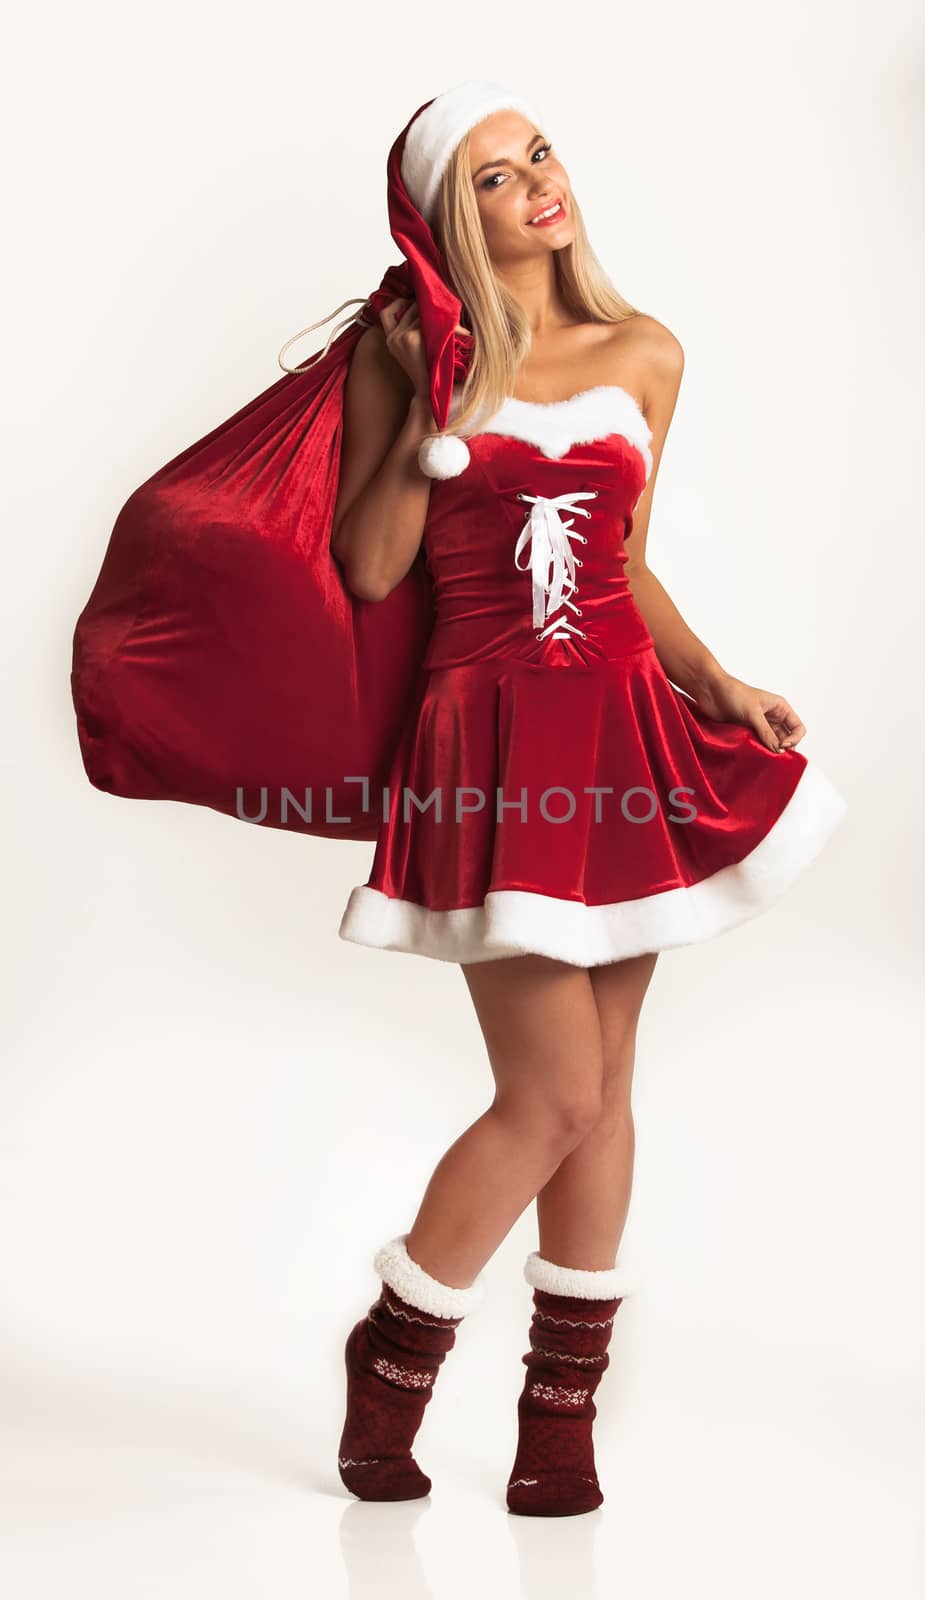 Cute young girl in santa claus costume holding large gift bag on white background